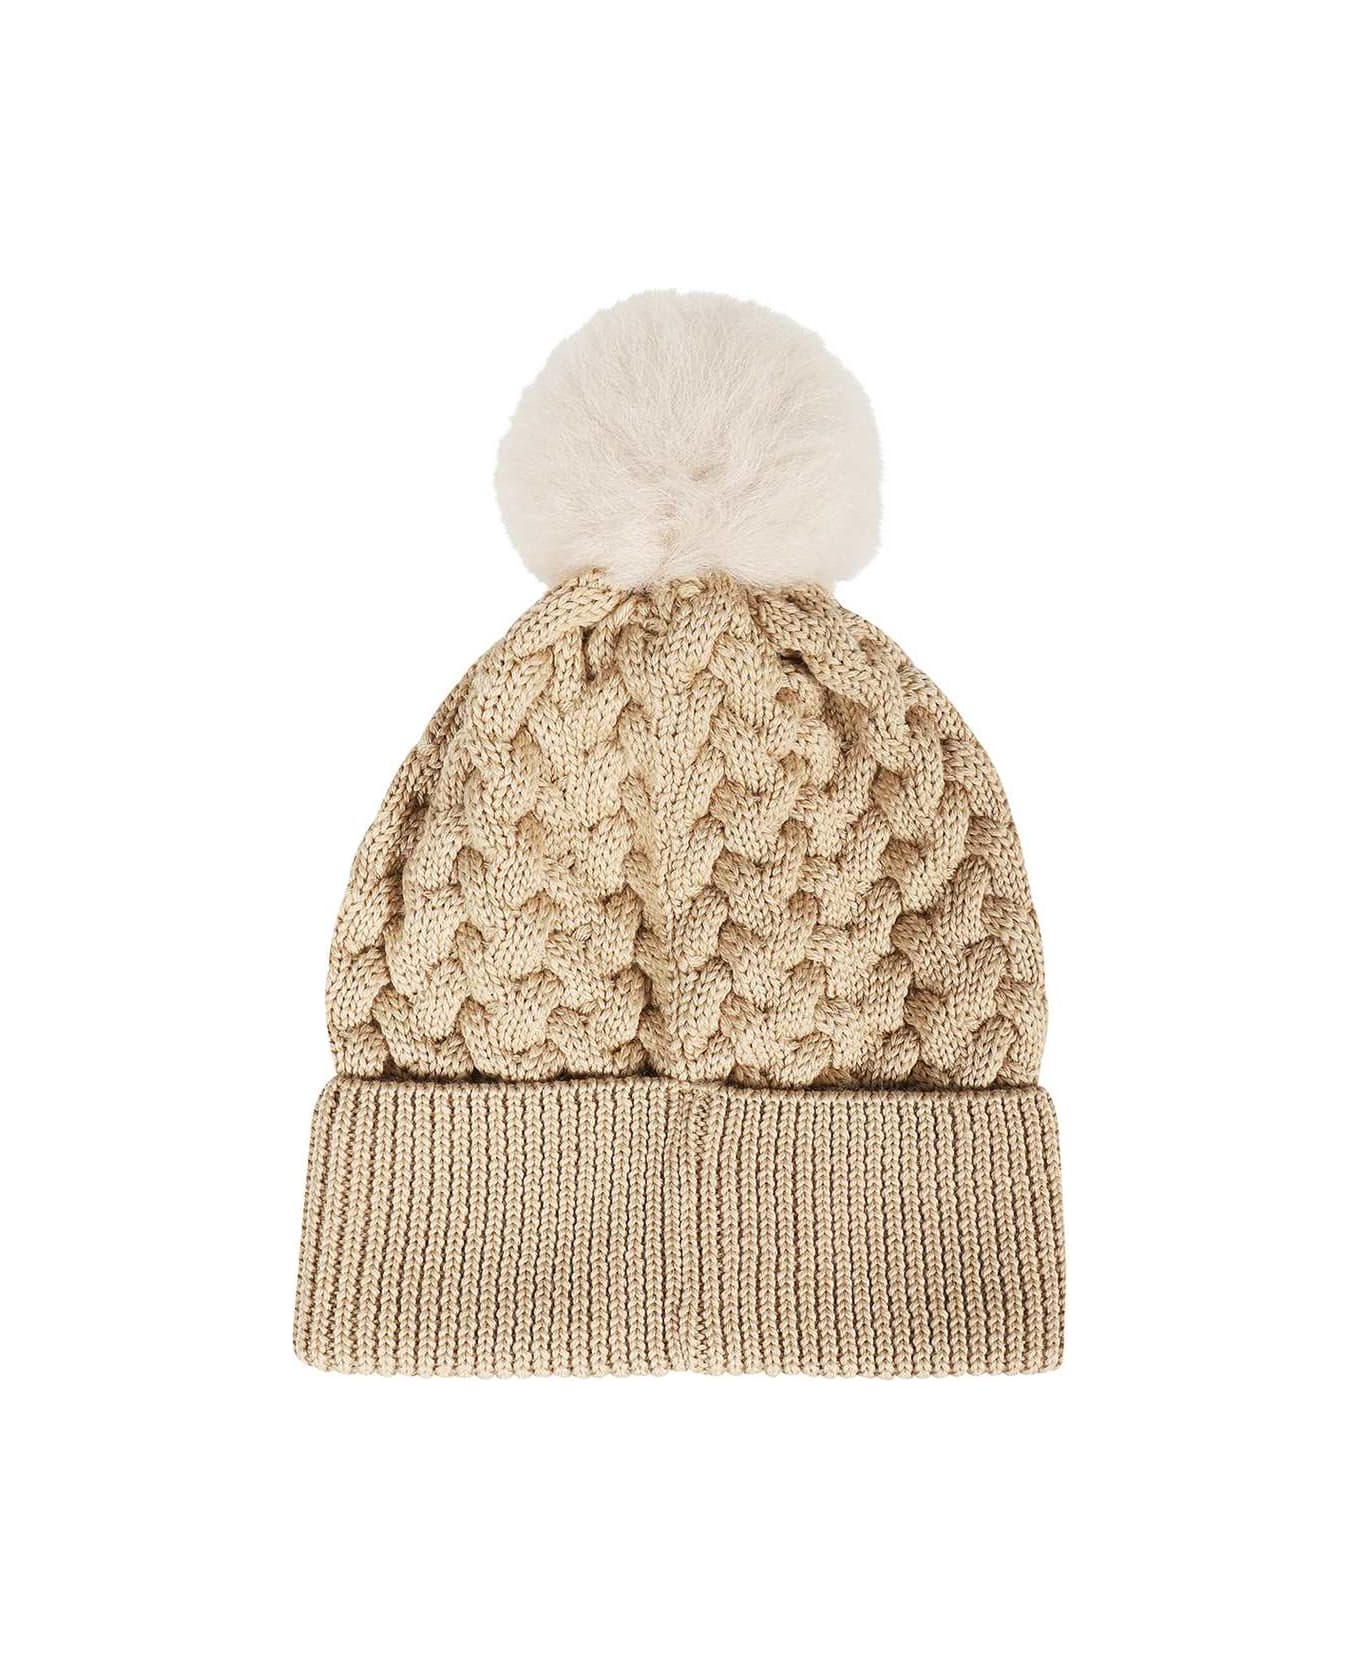 Parajumpers Knitted Beanie With Pom-pom - Camel